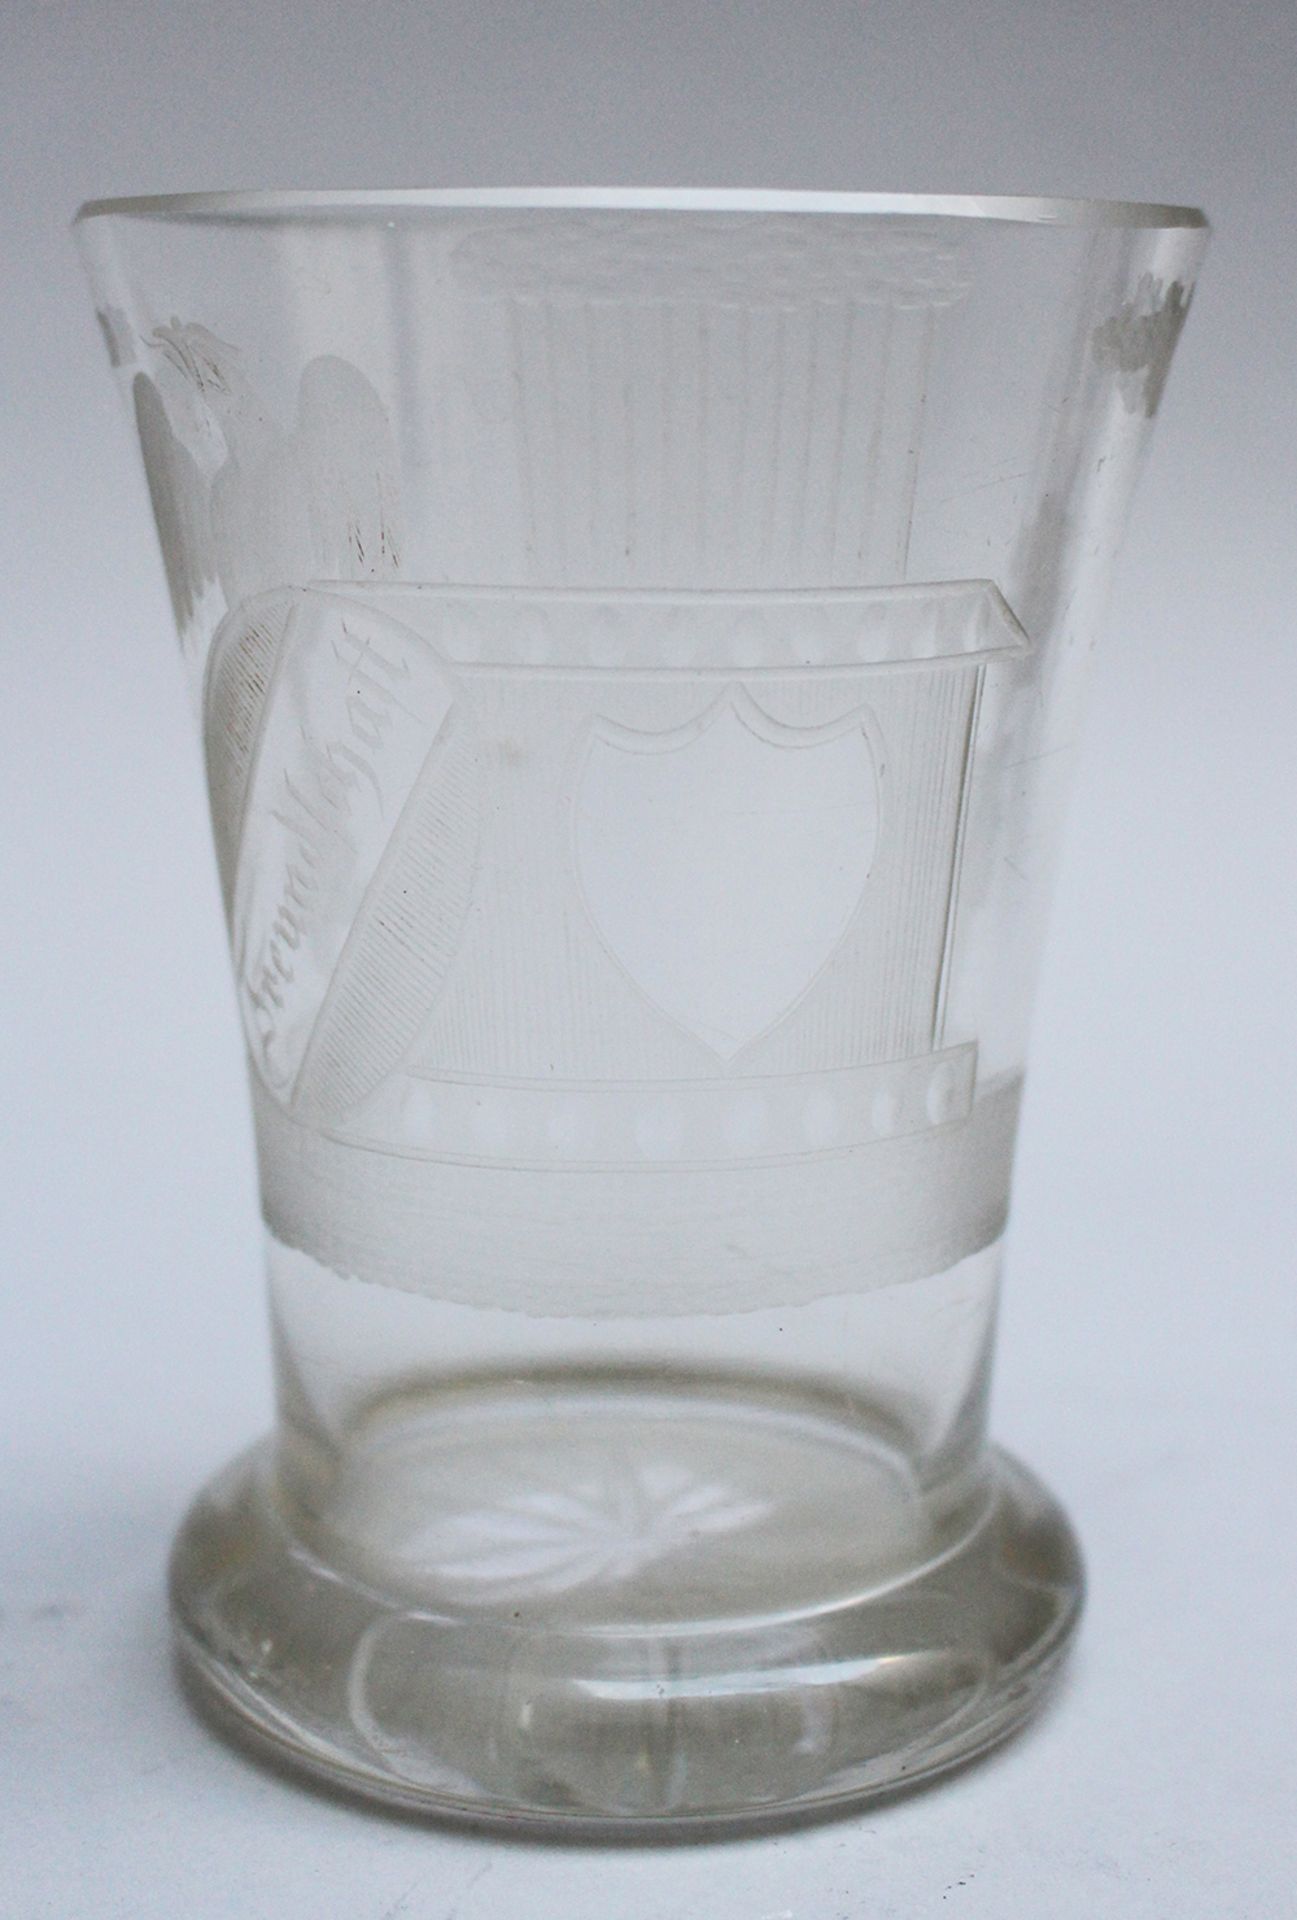 Friendship beaker, transparent glass with etched eagle and classical decoration described